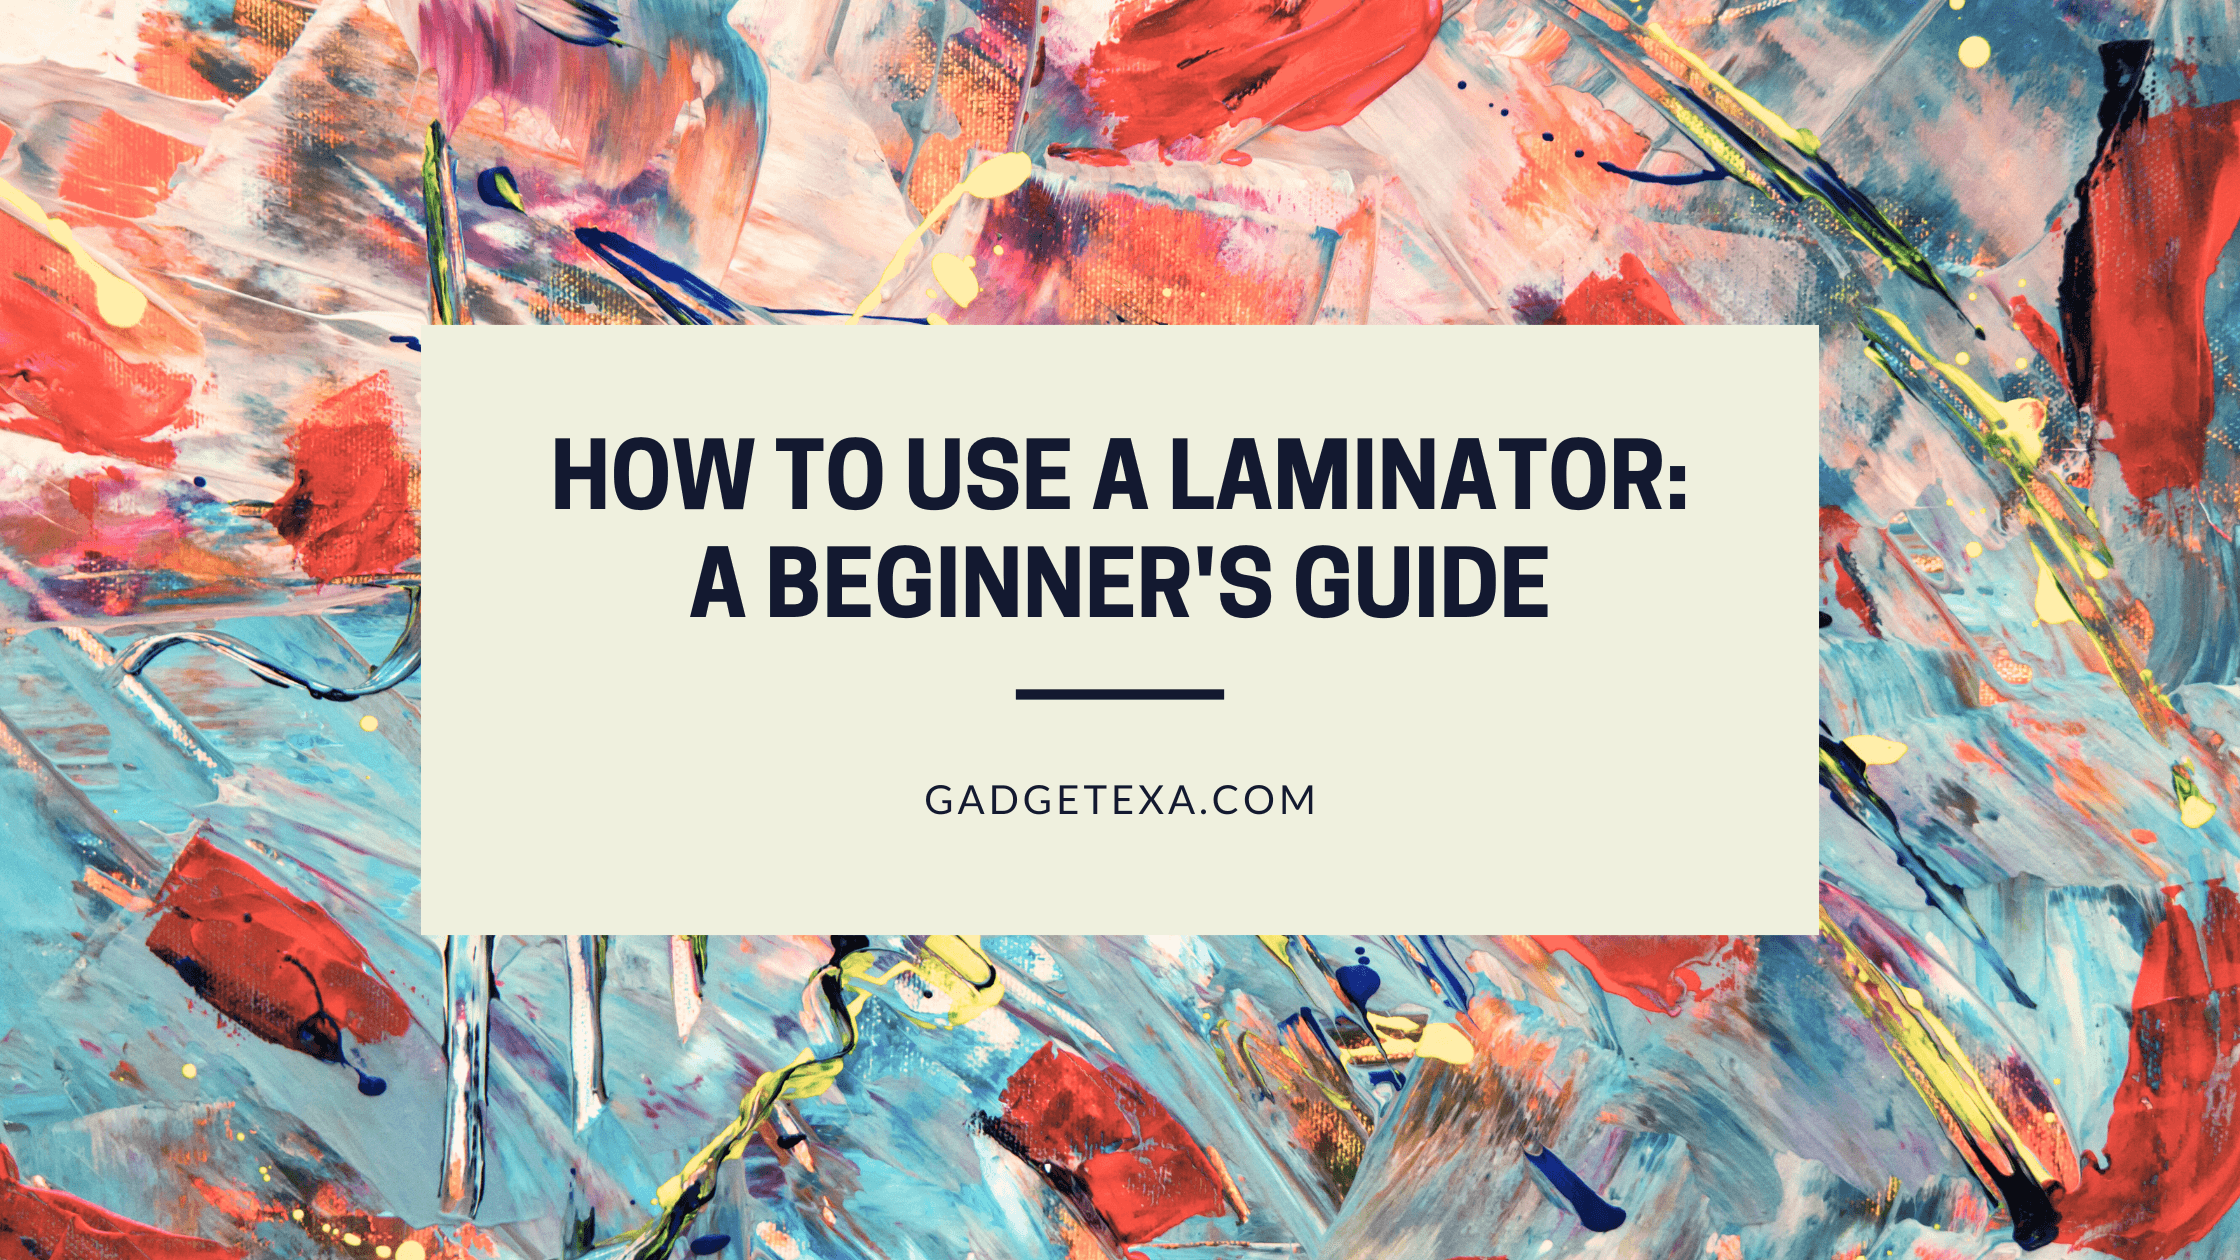 You are currently viewing How to Use a Laminator: A Beginner’s Guide